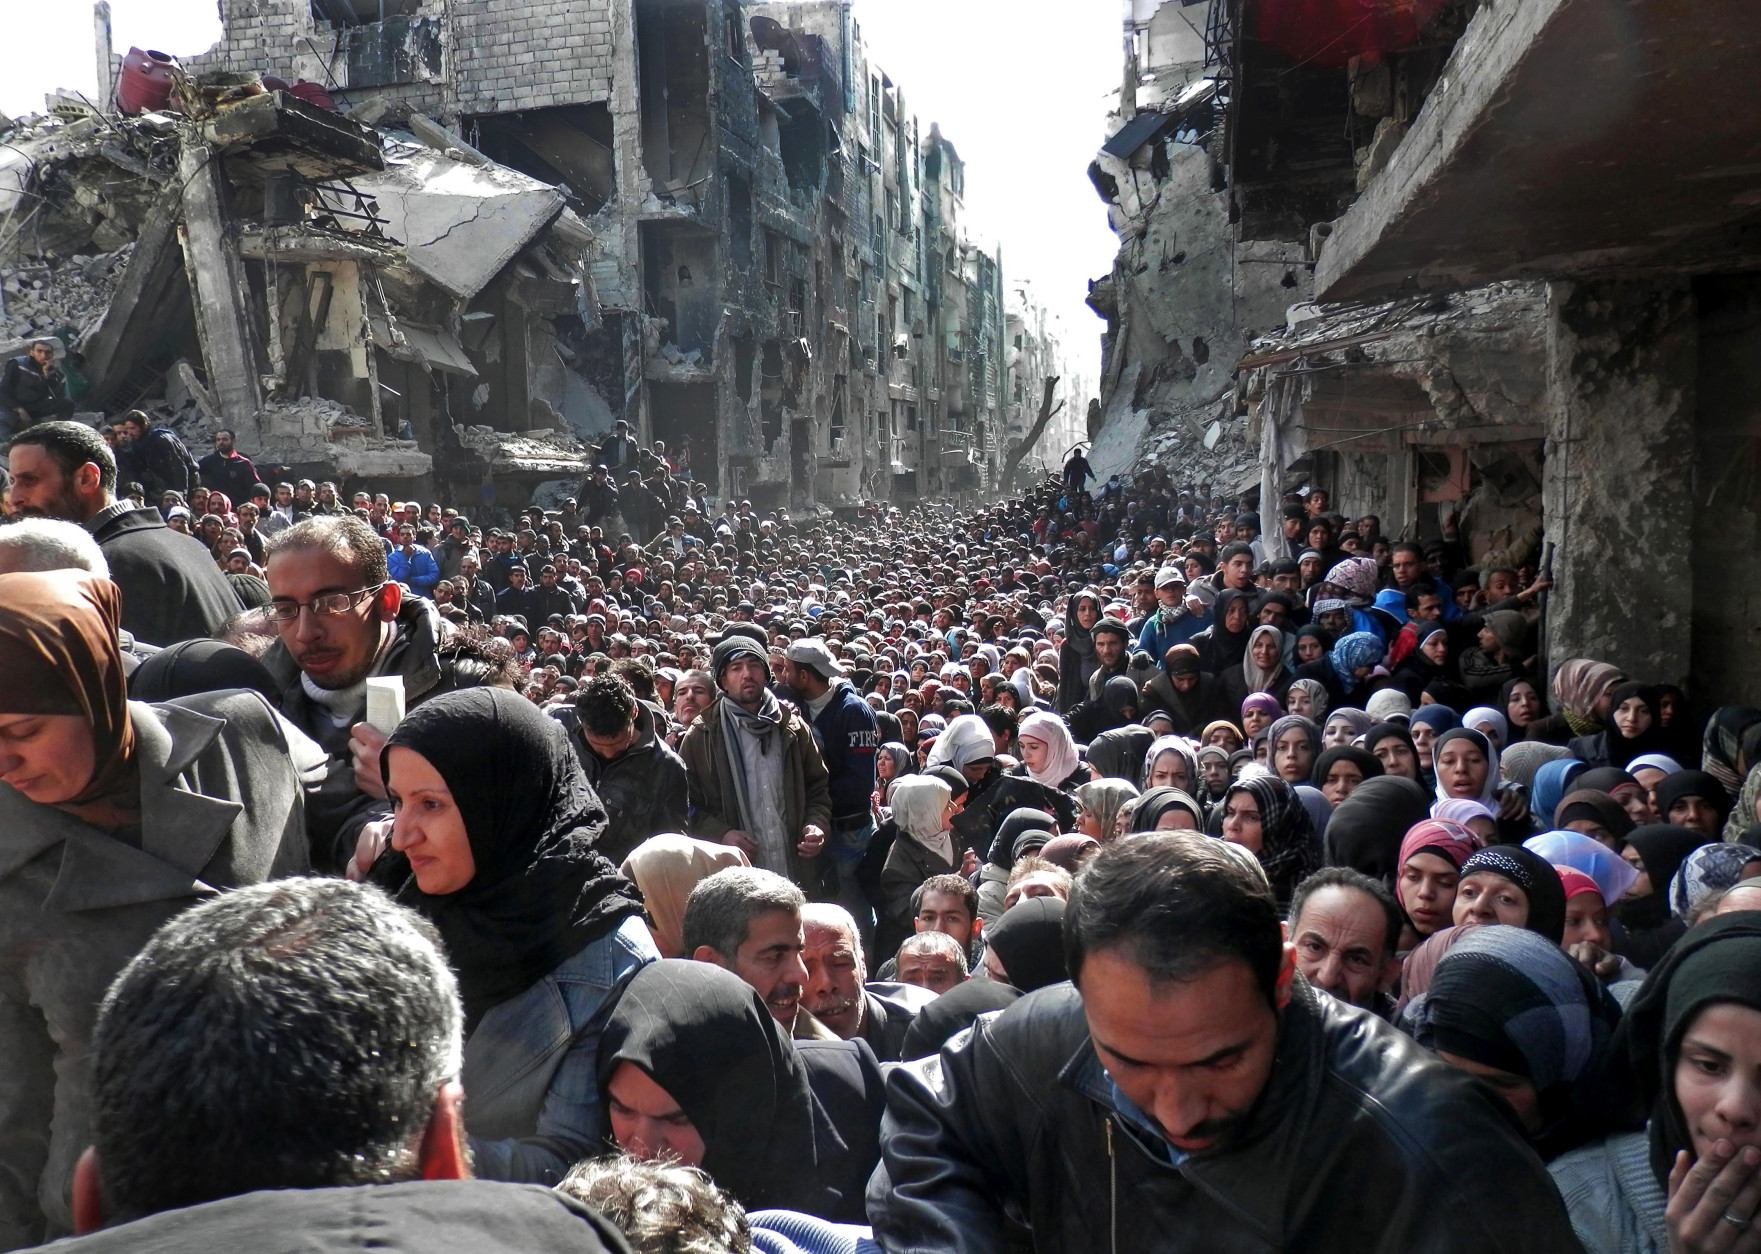 FOR USE AS DESIRED, YEAR END PHOTOS - FILE - This picture taken on Jan. 31, 2014, and released by the UNRWA, shows residents of the besieged Palestinian camp of Yarmouk, queuing to receive food supplies, in Damascus, Syria. A United Nations official called on warring sides in Syria to allow aid workers to resume distribution of food and medicine in a besieged Palestinian district of Damascus. The call comes as U.N. Secretary General Ban Ki-Moon urged Syrian government to authorize more humanitarian staff to work inside the country, devastated by its 3-year-old conflict. (AP Photo/UNRWA, File)